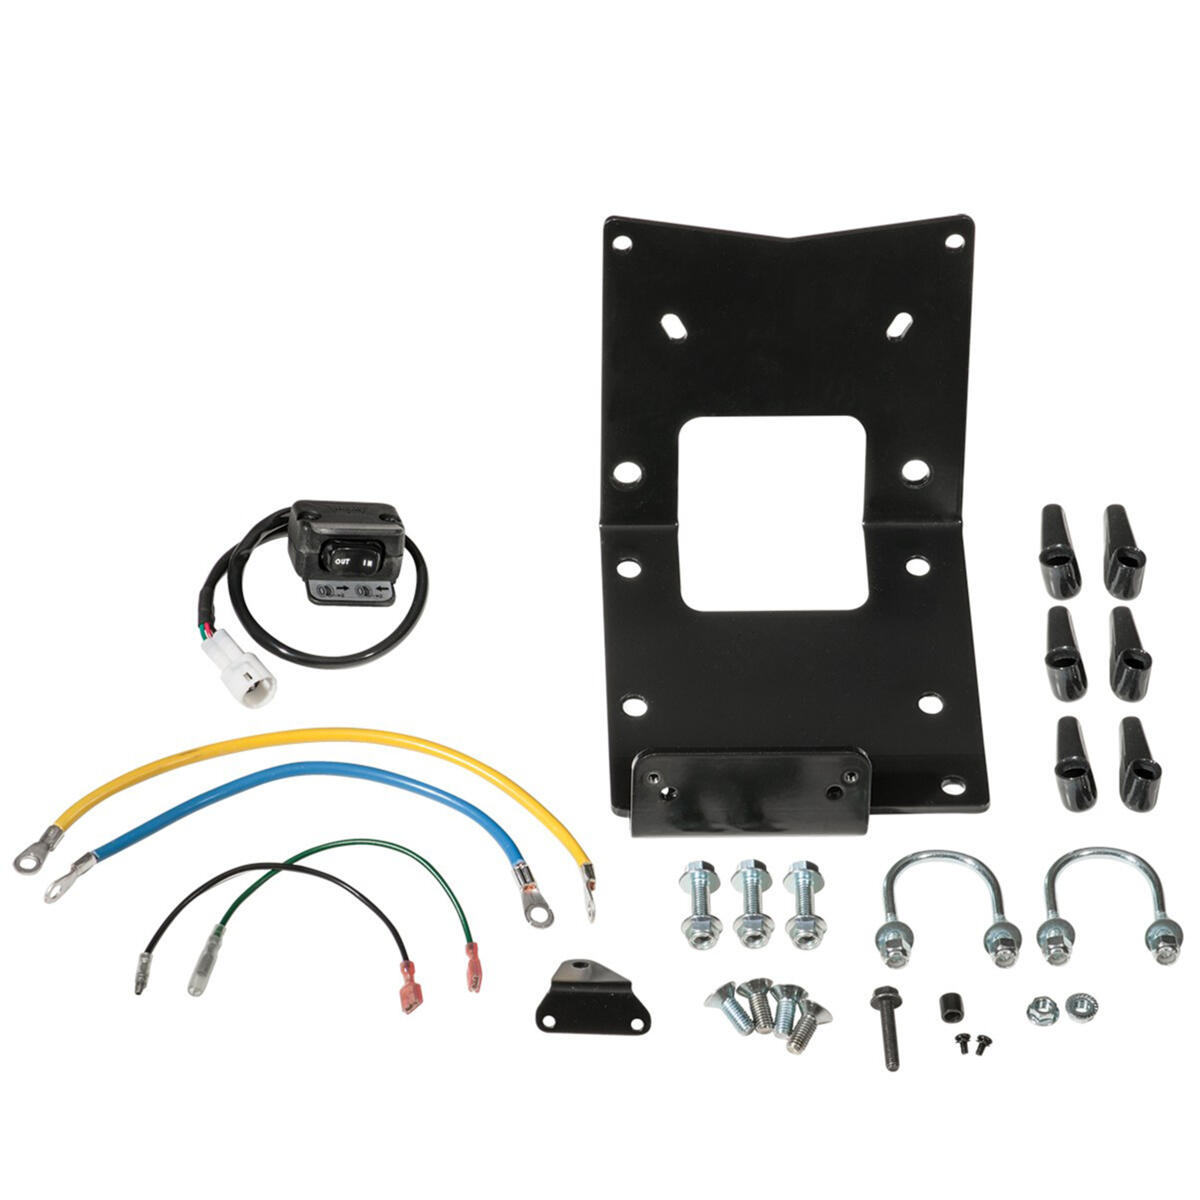 Winch mount kit with wiring and switches to install Vantage 2000 or Pro-Vantage 2500 winch.